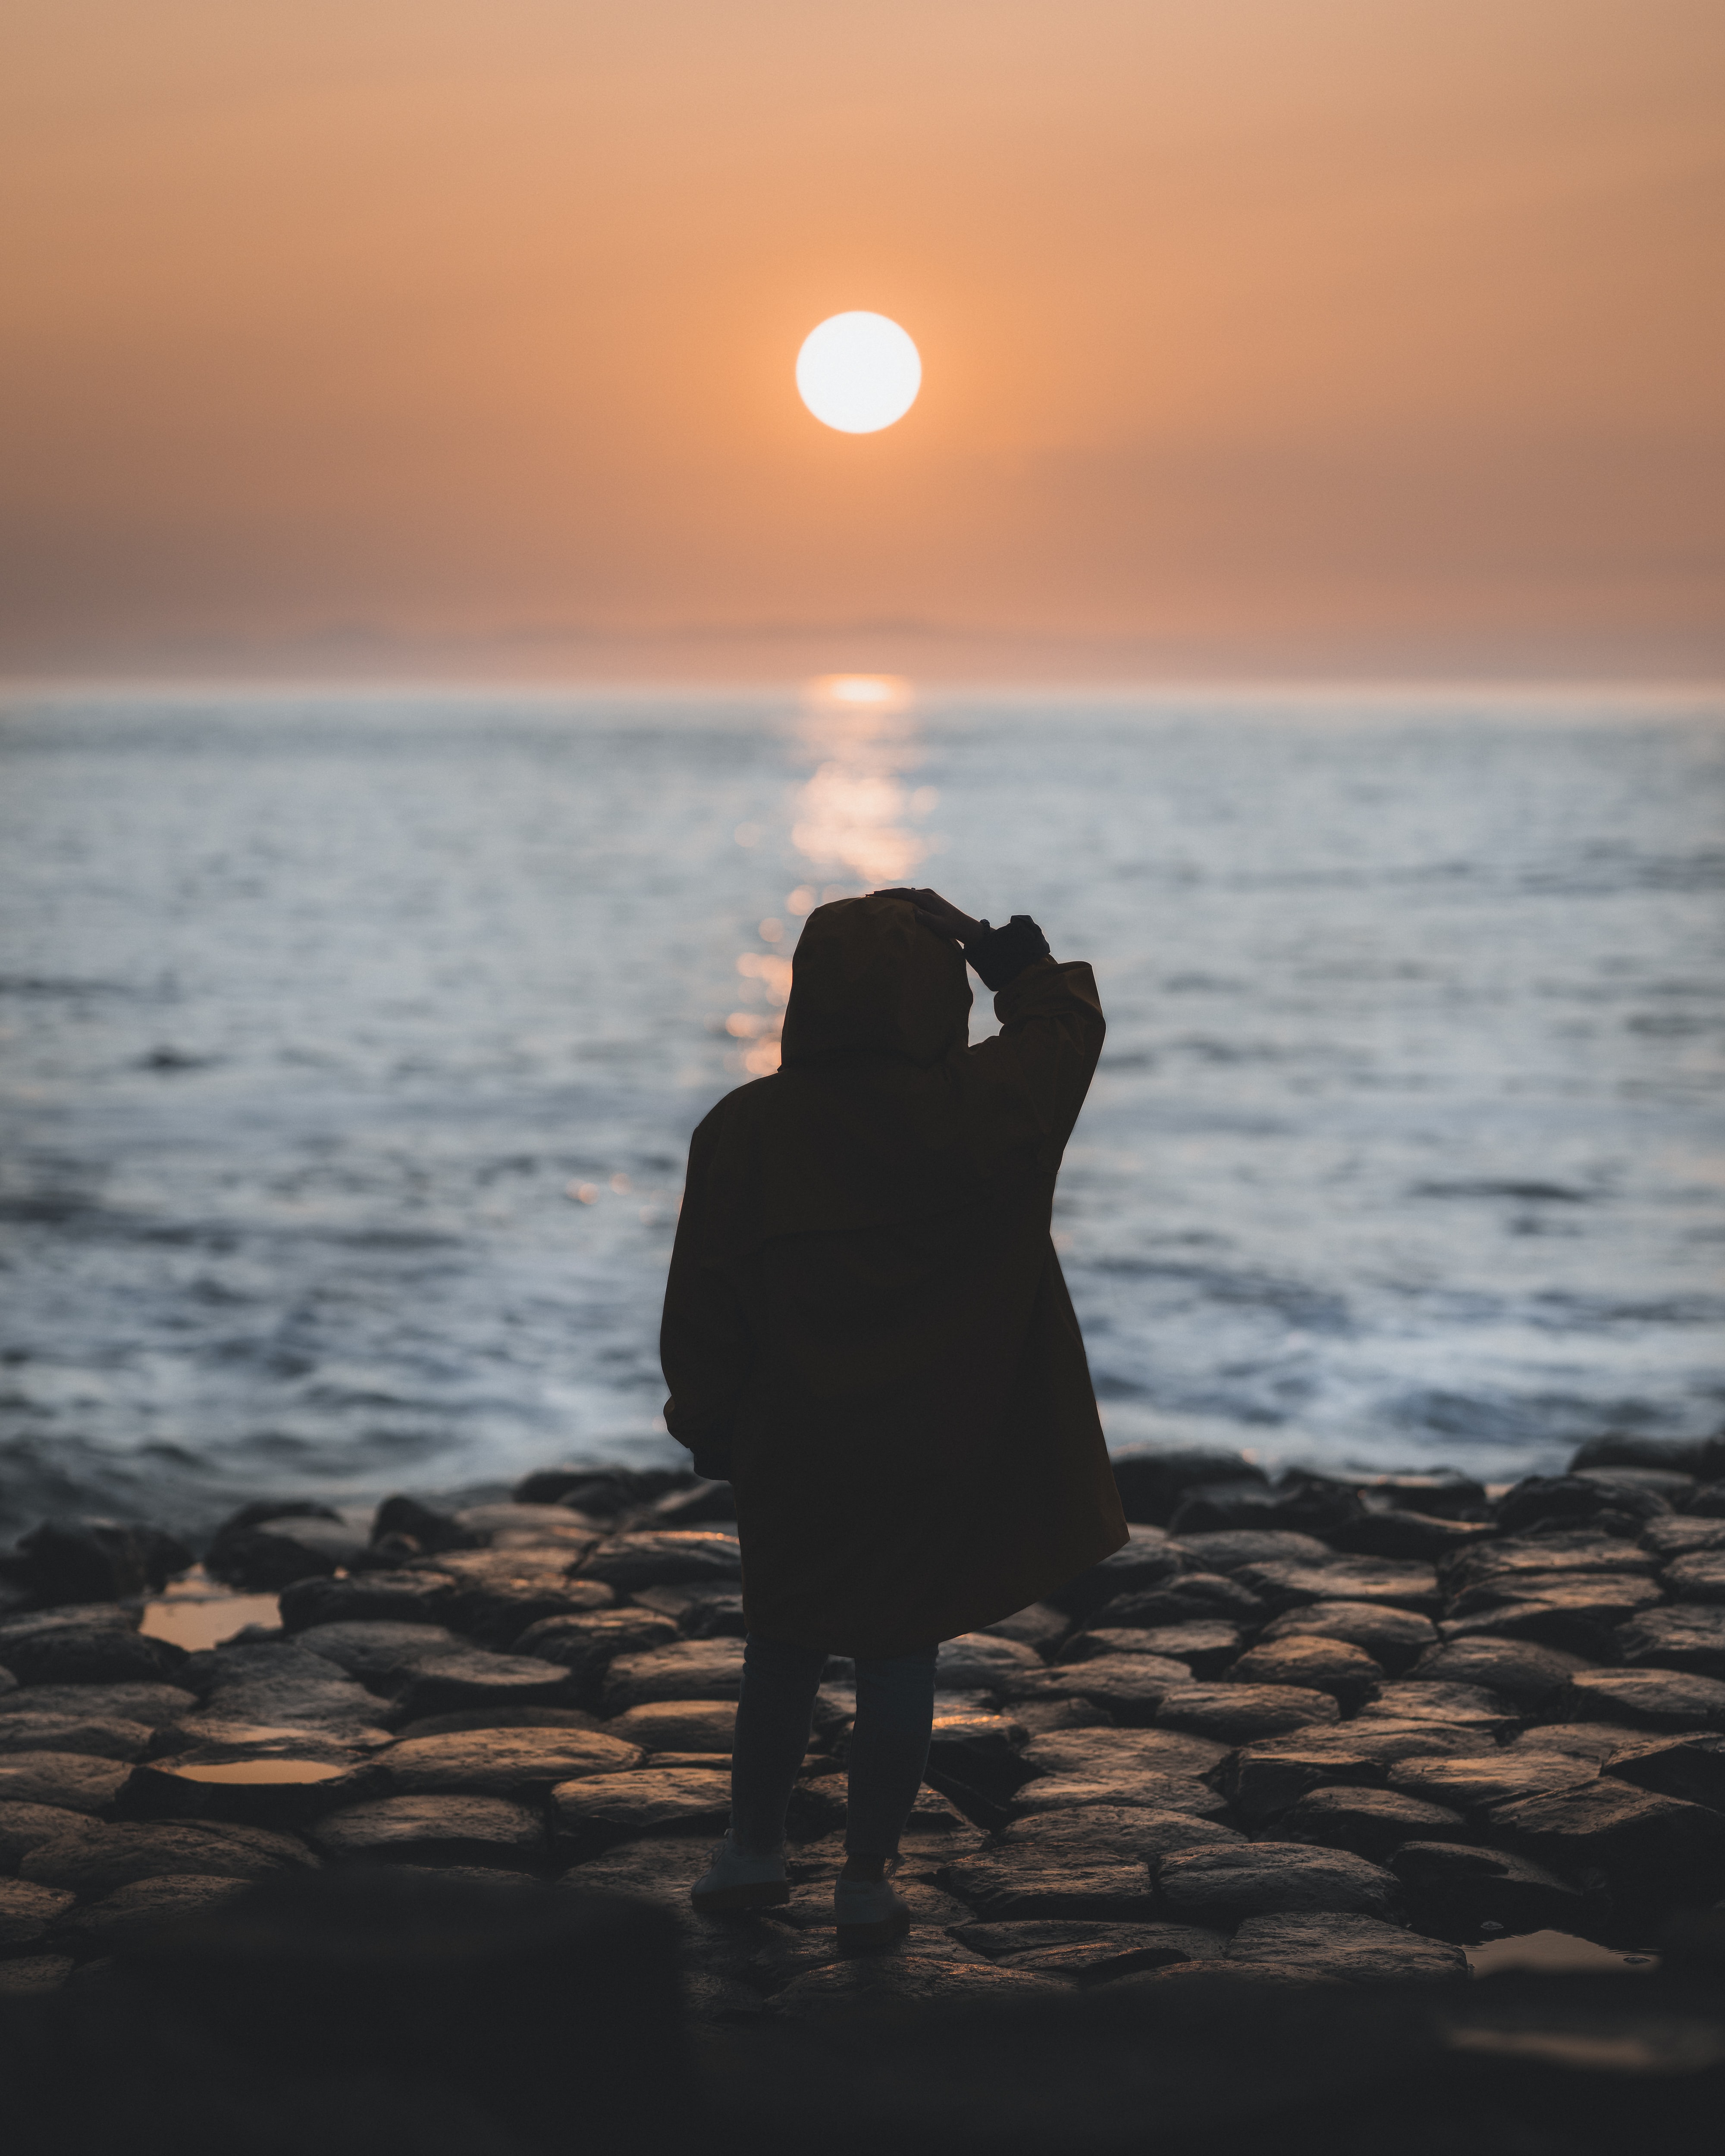 alone, sunset, glare, miscellanea, miscellaneous, girl, loneliness, lonely High Definition image